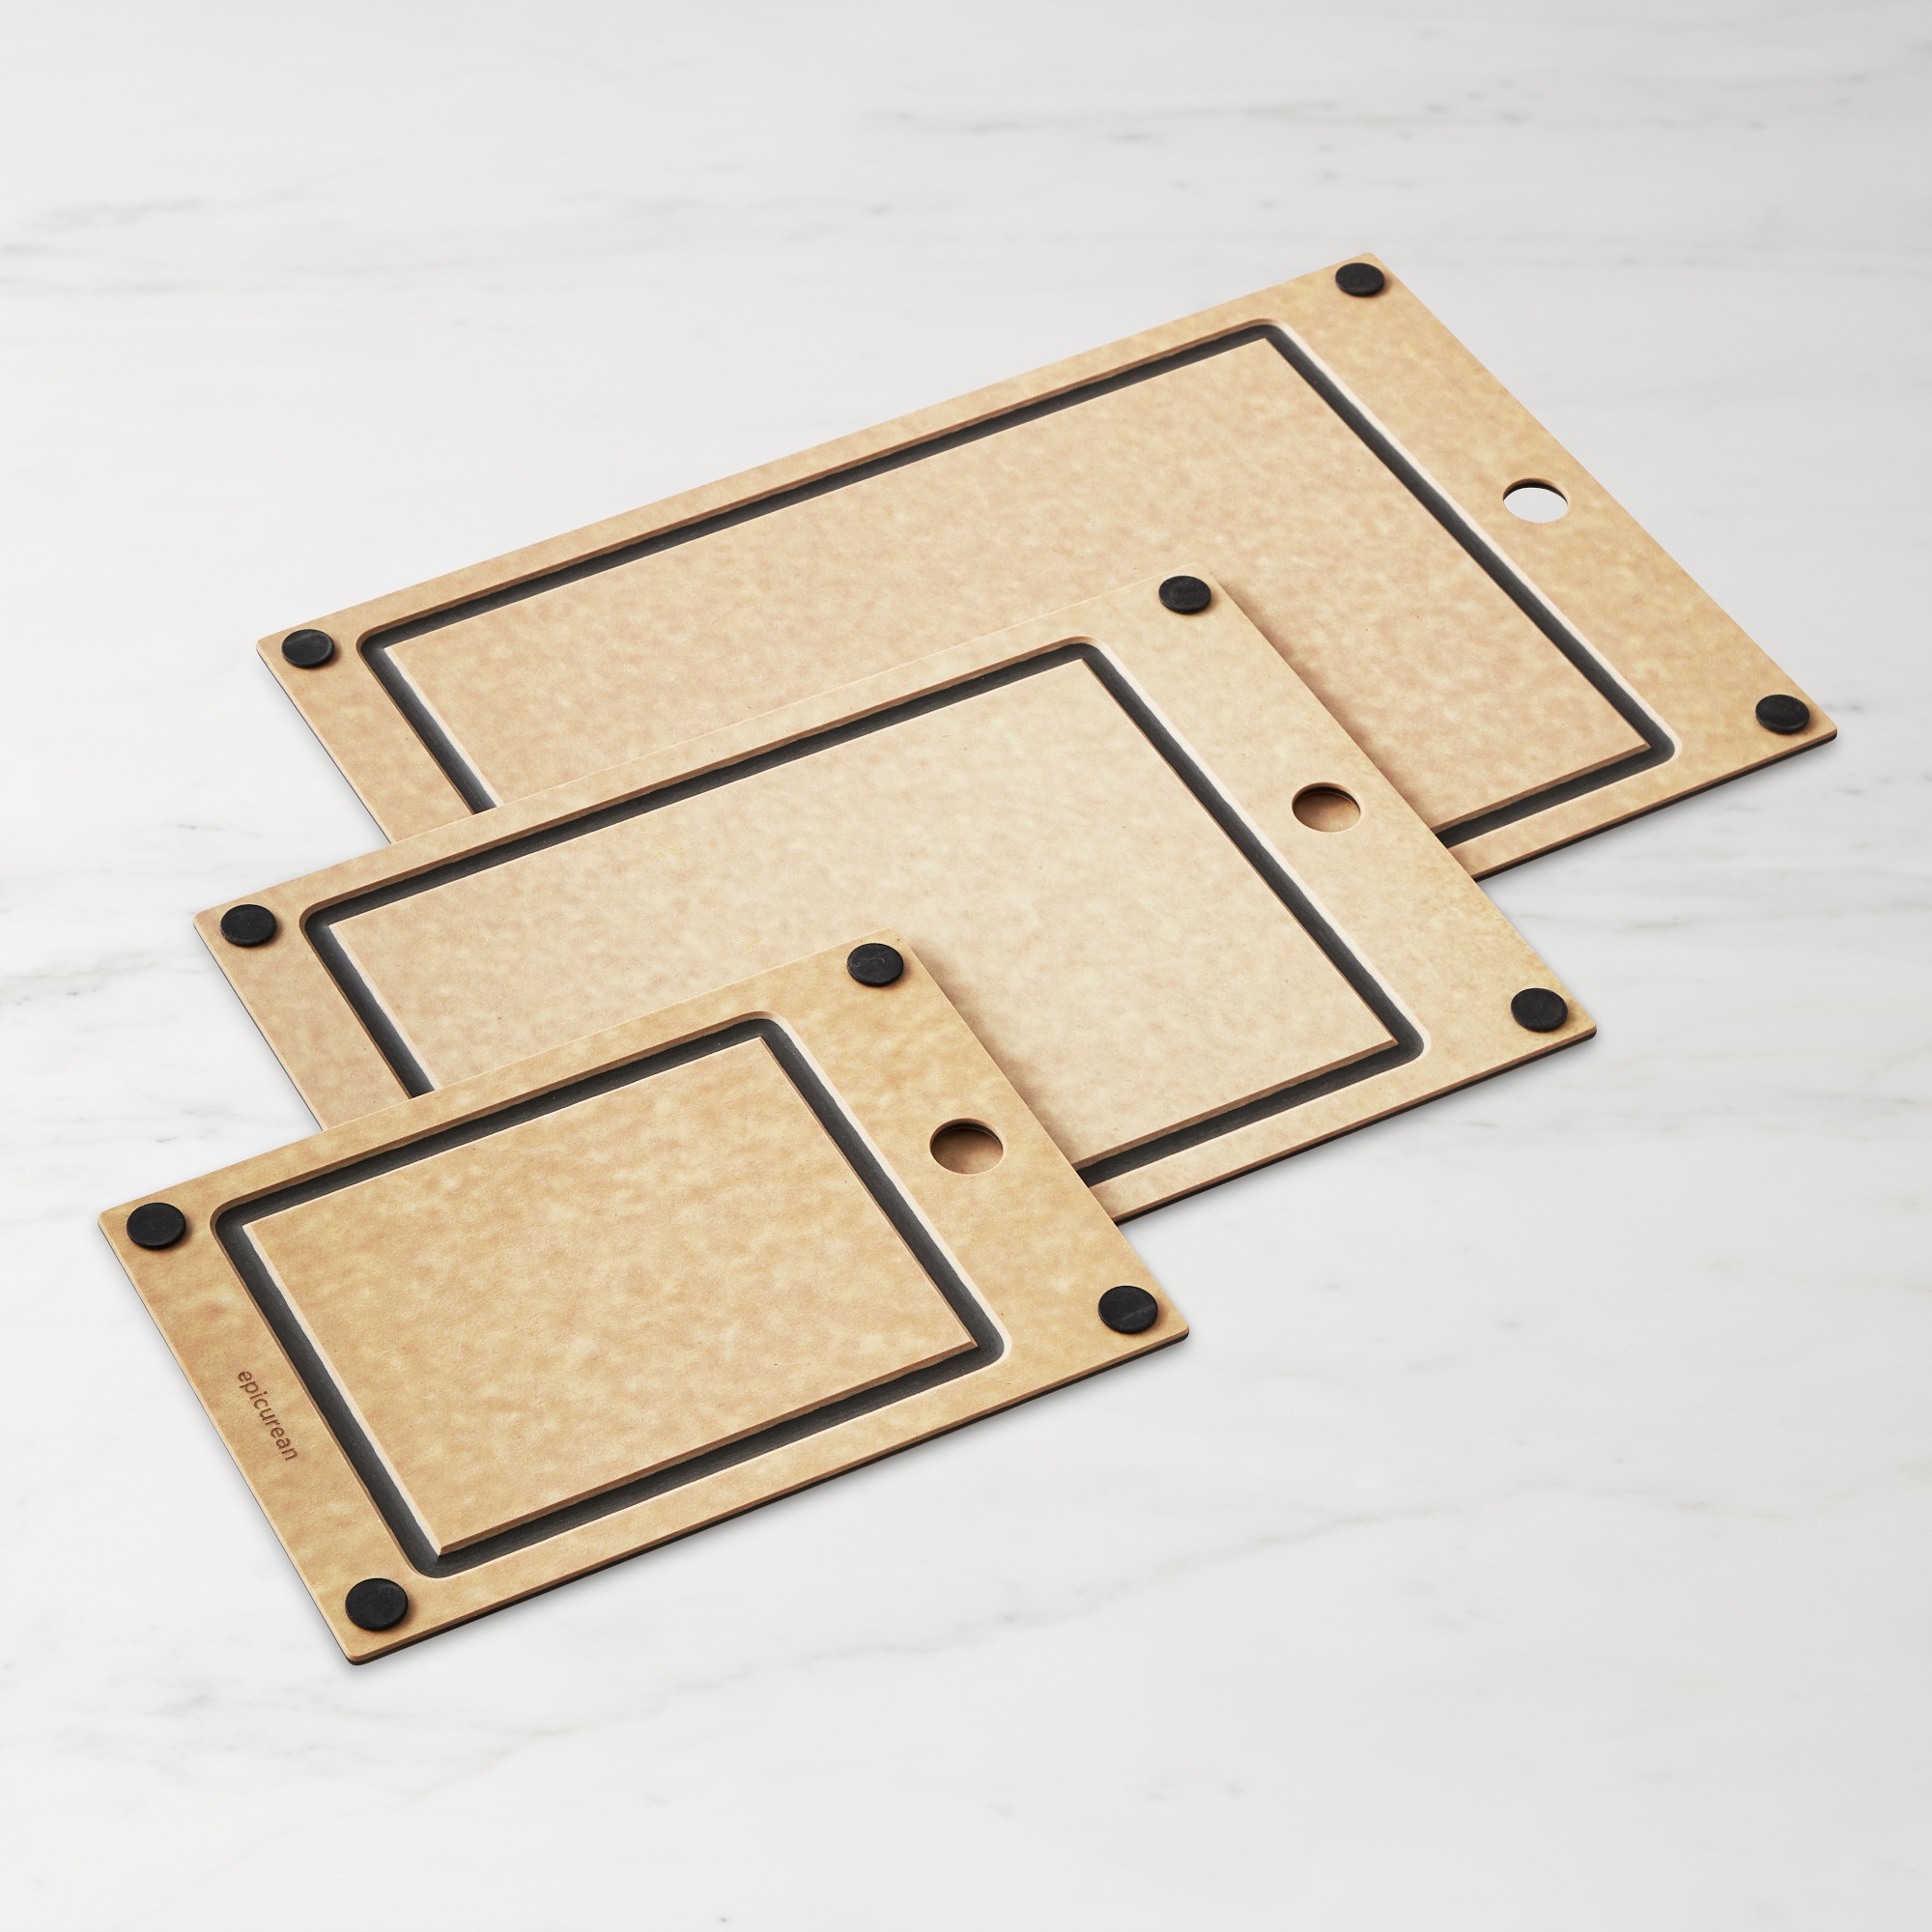 Epicurean 3-Piece Set Boards with Well